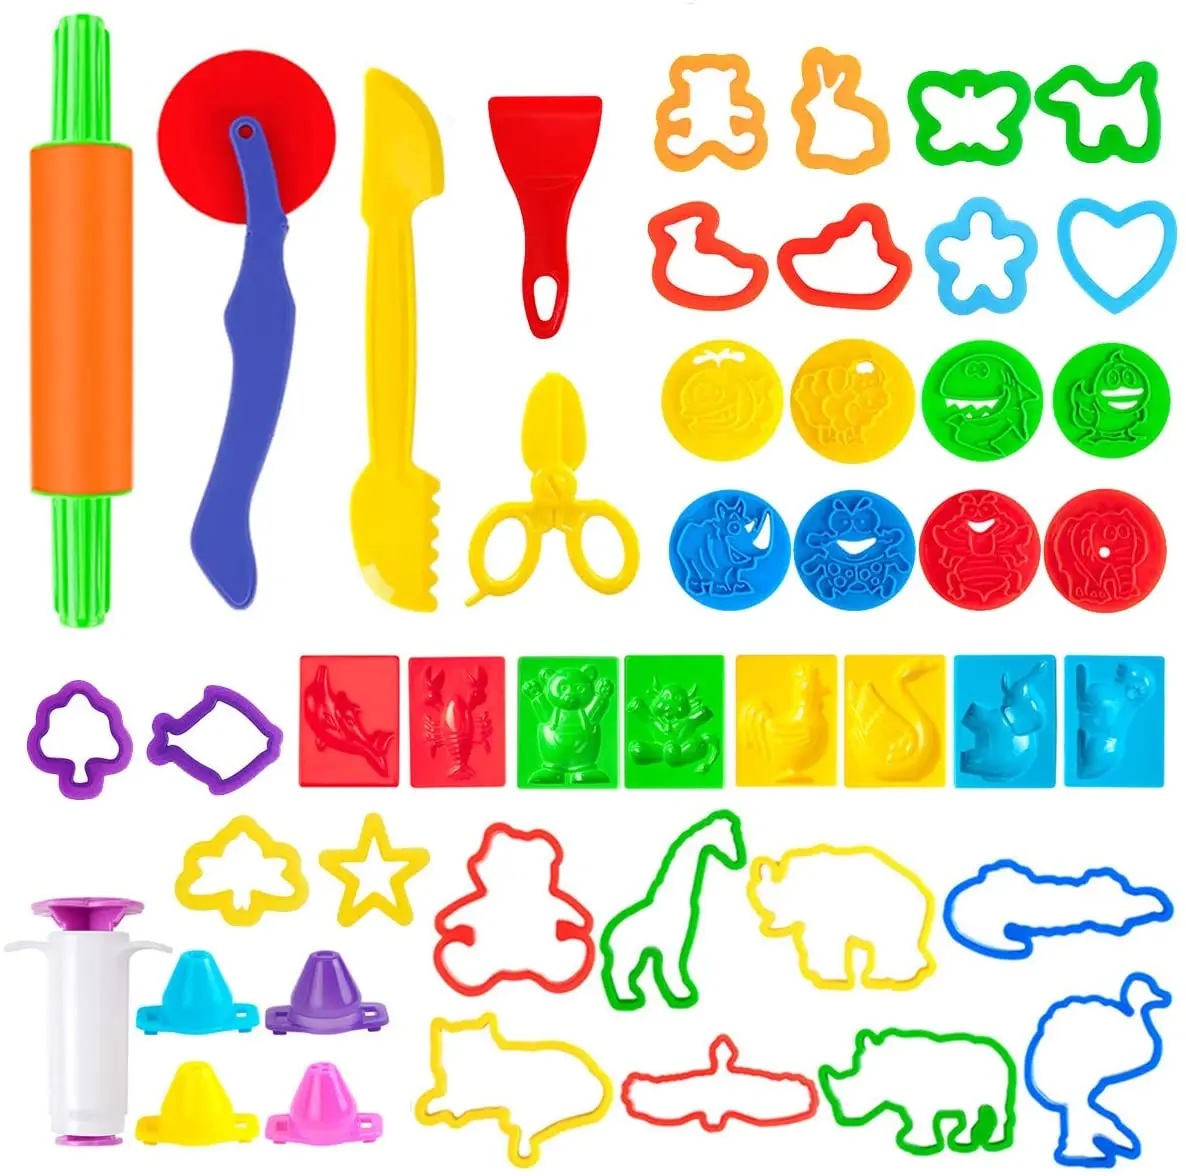 Dough Mold Toy,Coxeer 18PCS Dought Tool Kit for Kids,Various Plastic Moulds Educational Fashion Creative Clay Play Tool Clay Dough Tool,Assorted Colors for Air Dry Clay & Dough Toy 